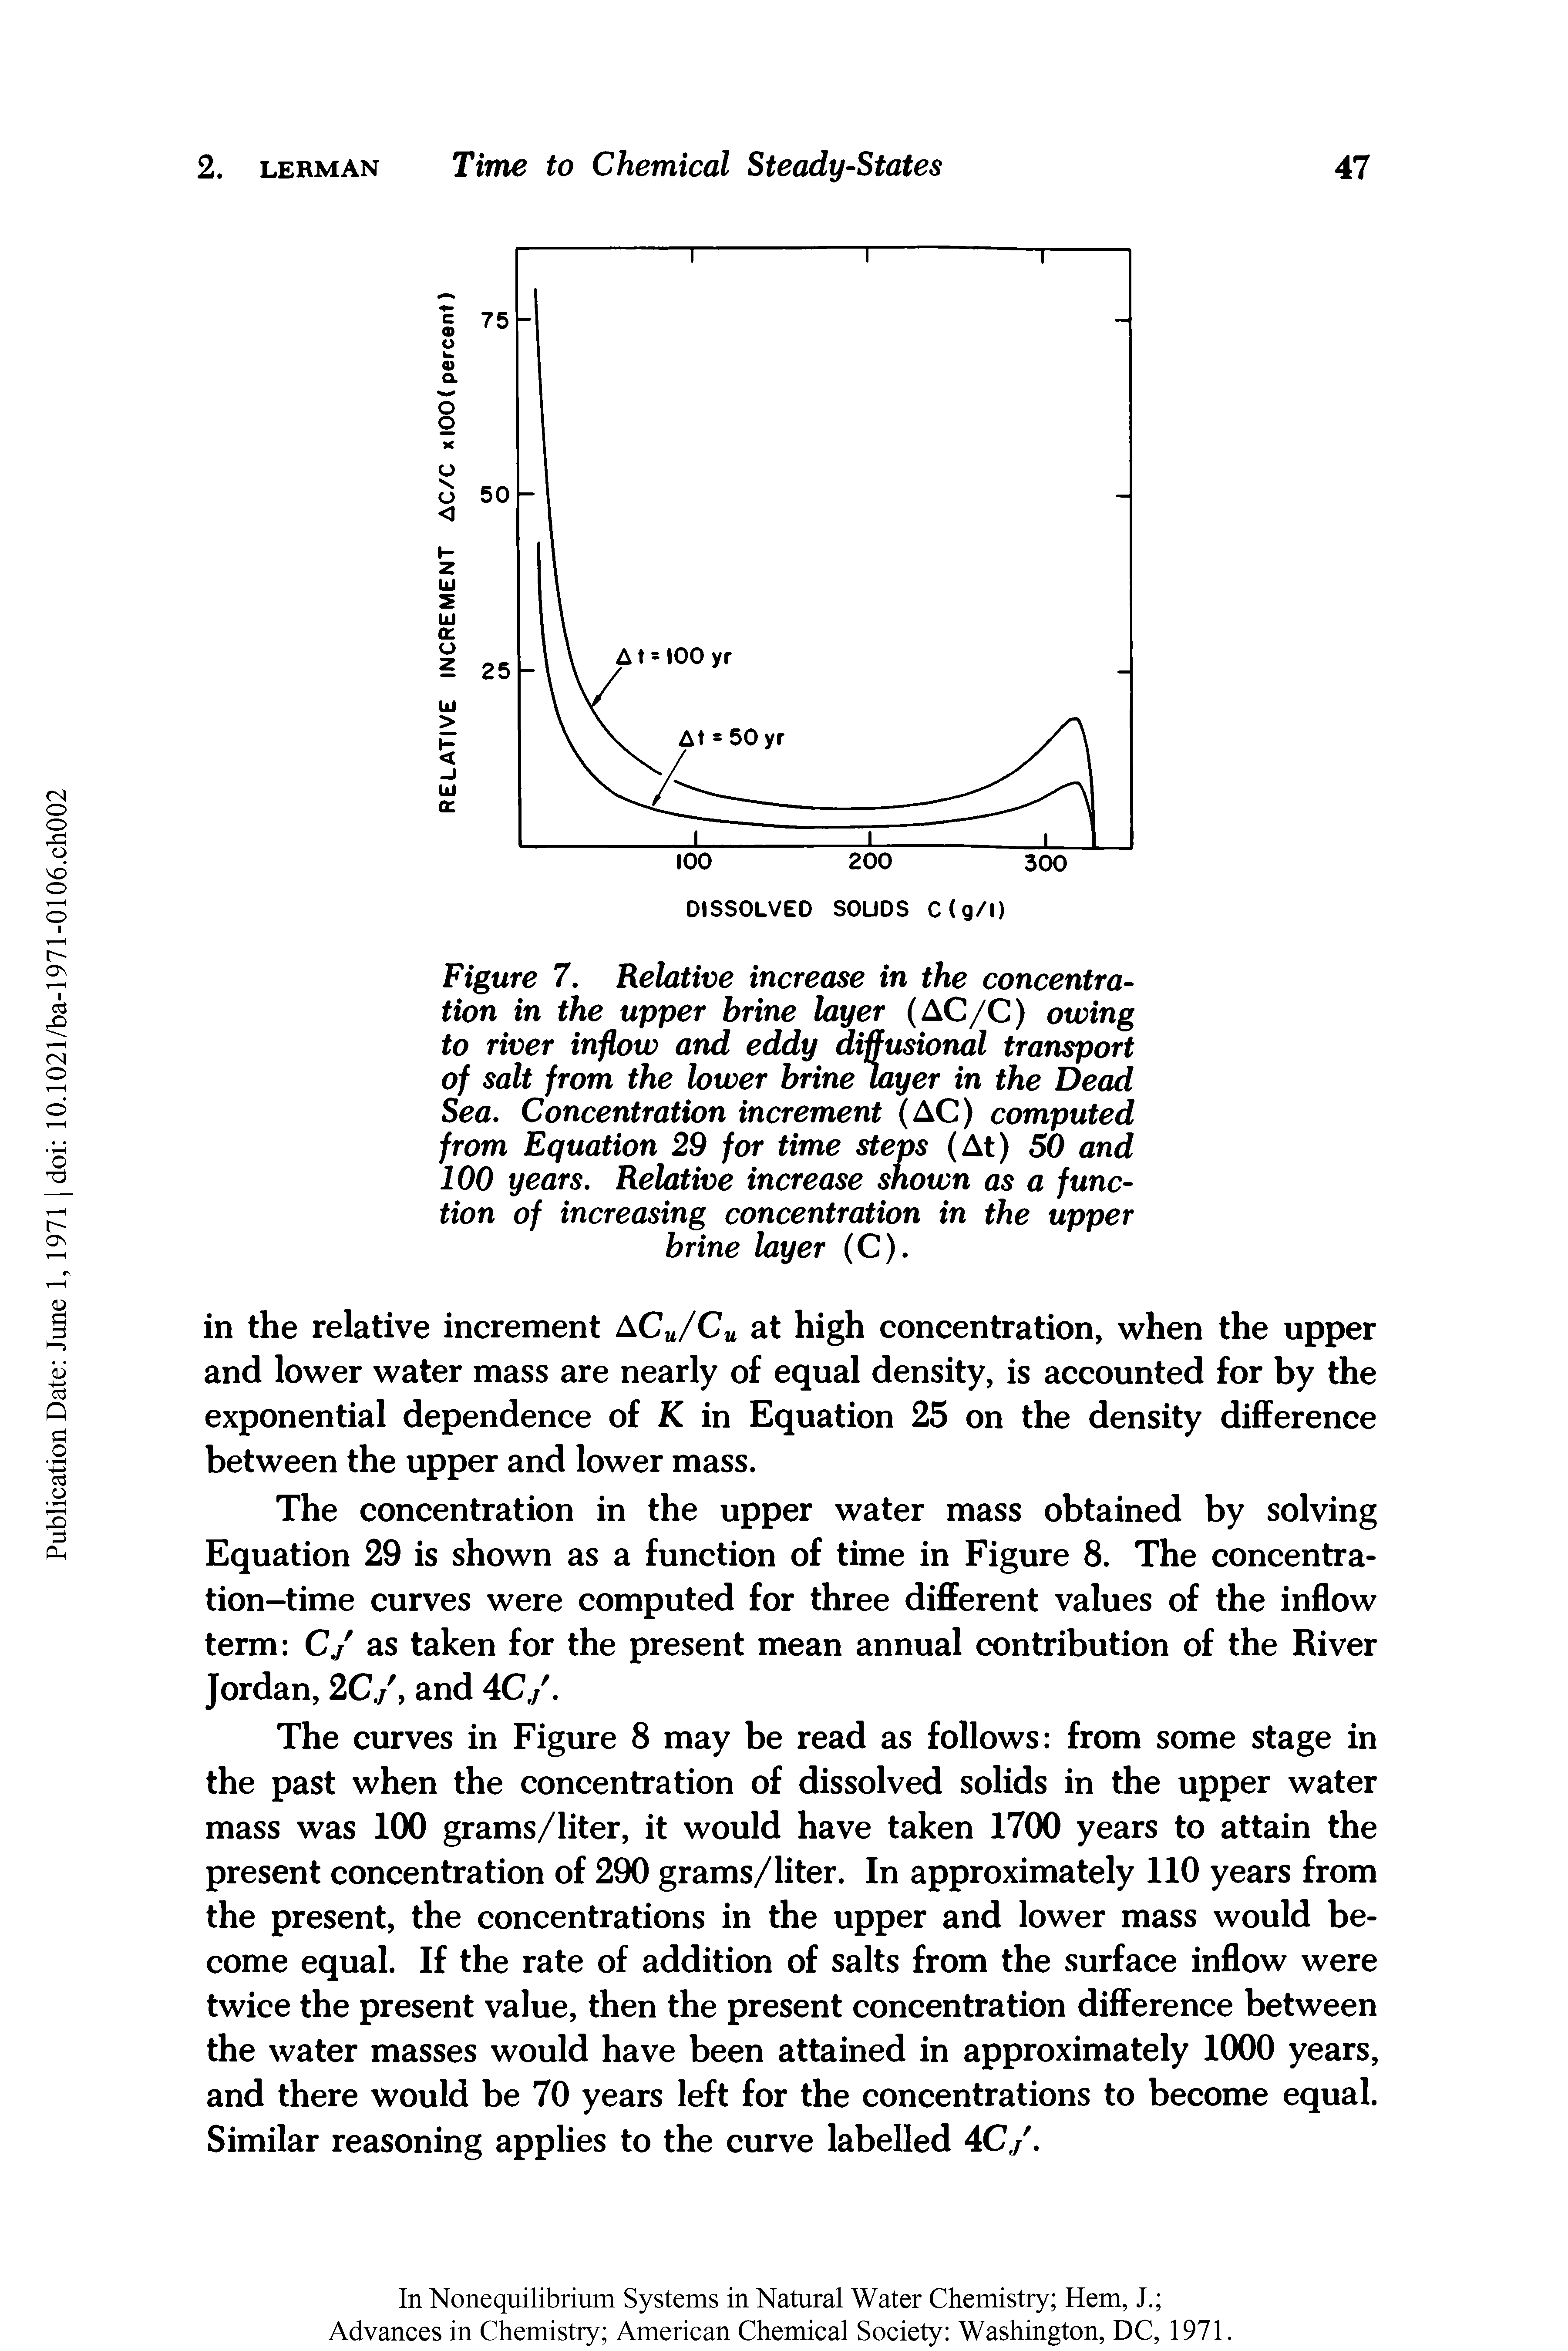 Figure 7. Relative increase in the concentration in the upper brine layer (AC/C) owing to river inflow and eddy diffusional transport of salt from the lower brine layer in the Dead Sea. Concentration increment (AC) computed from Equation 29 for time steps (At) 50 and 100 years. Relative increase shown as a function of increasing concentration in the upper brine layer (C).